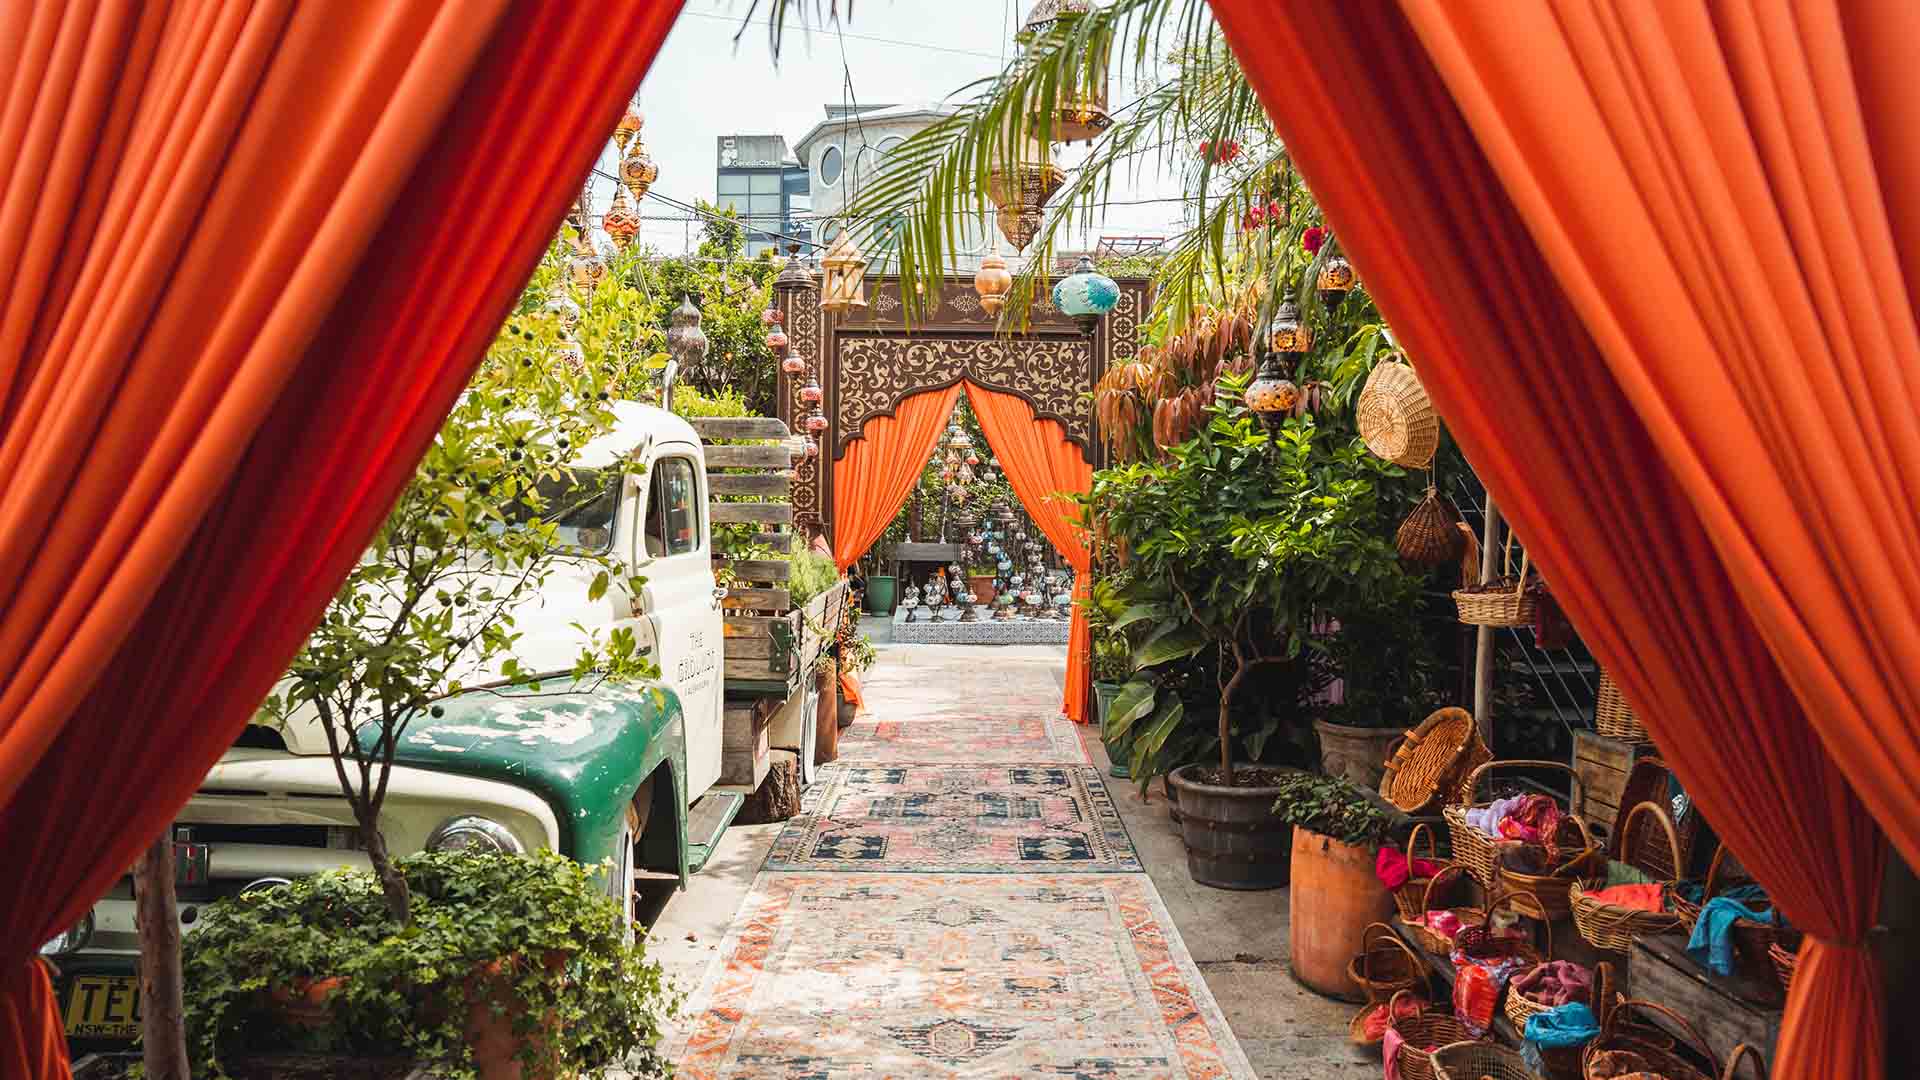 Welcome to Marrakesh at The Grounds